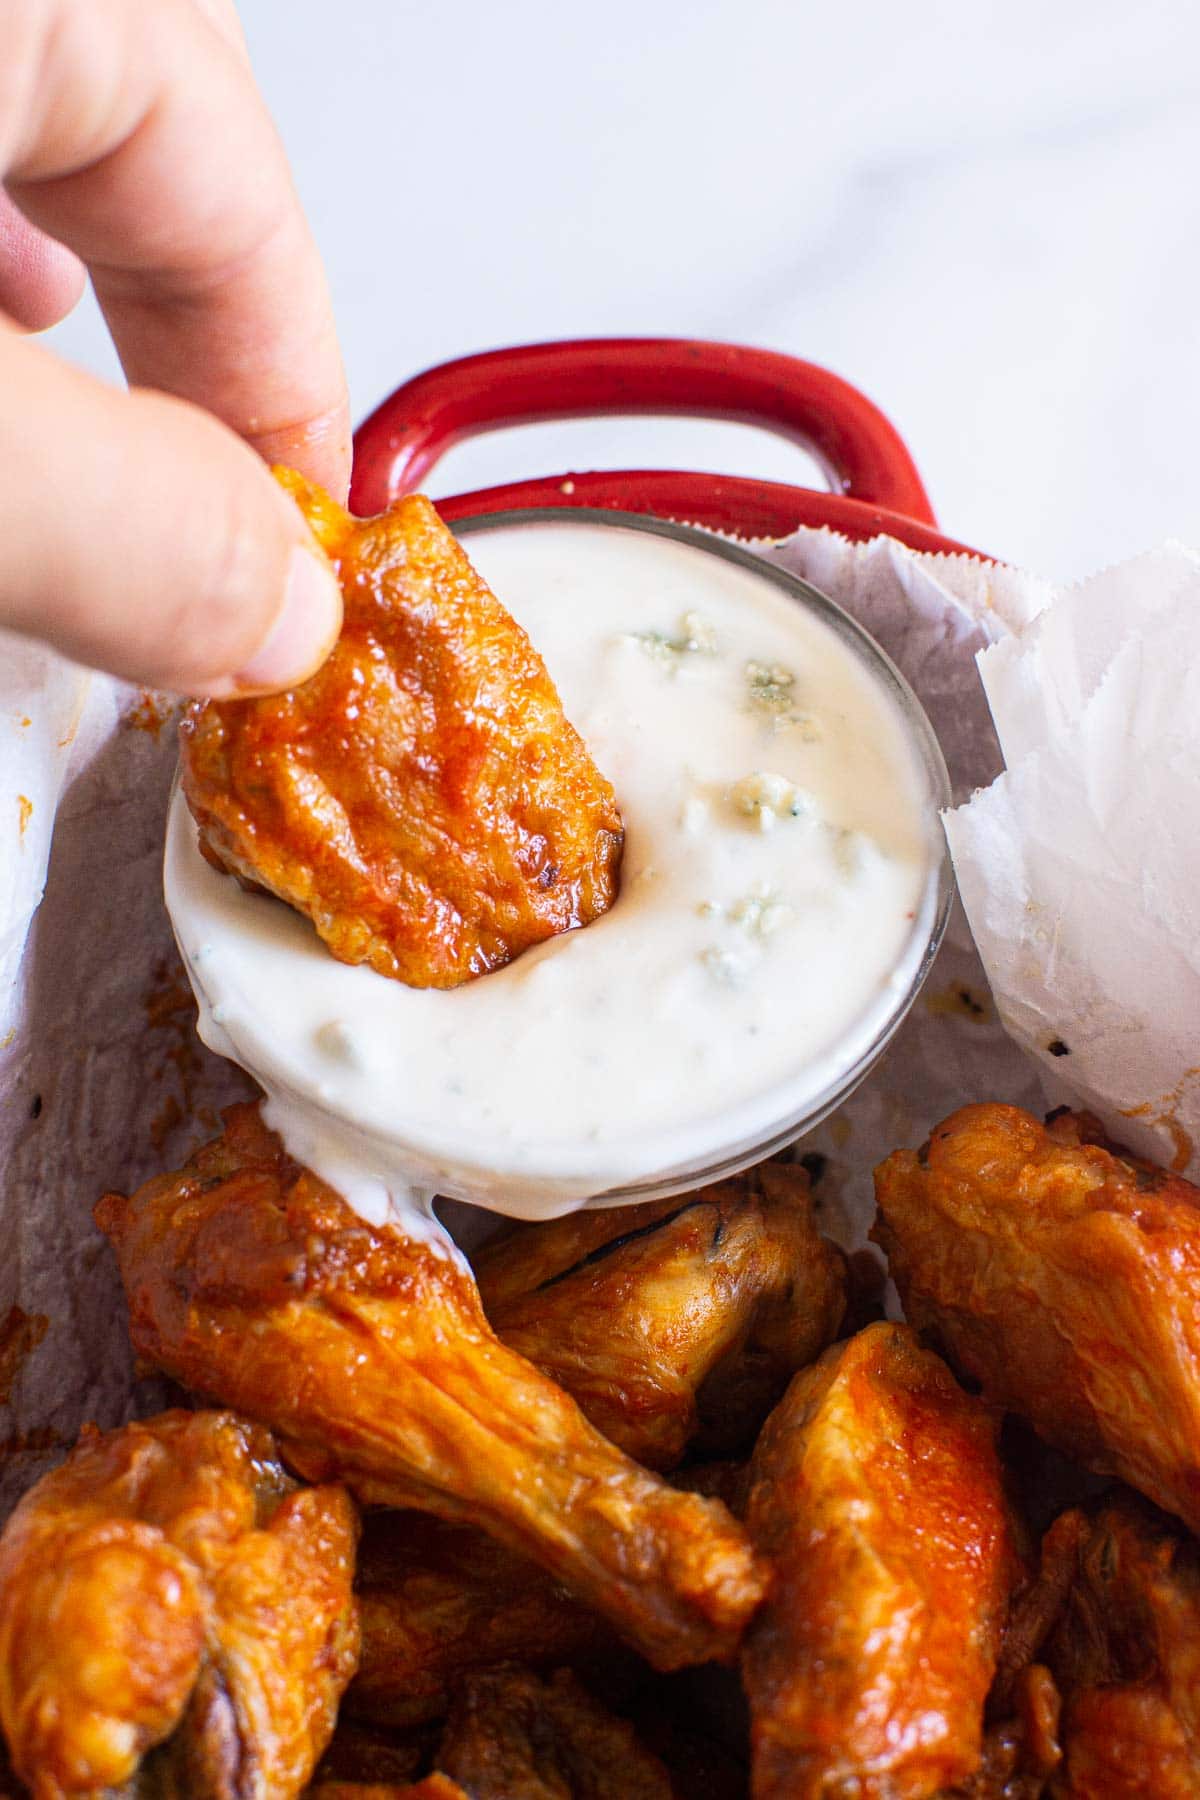 Dipping air fryer buffalo wing into blue cheese dip.